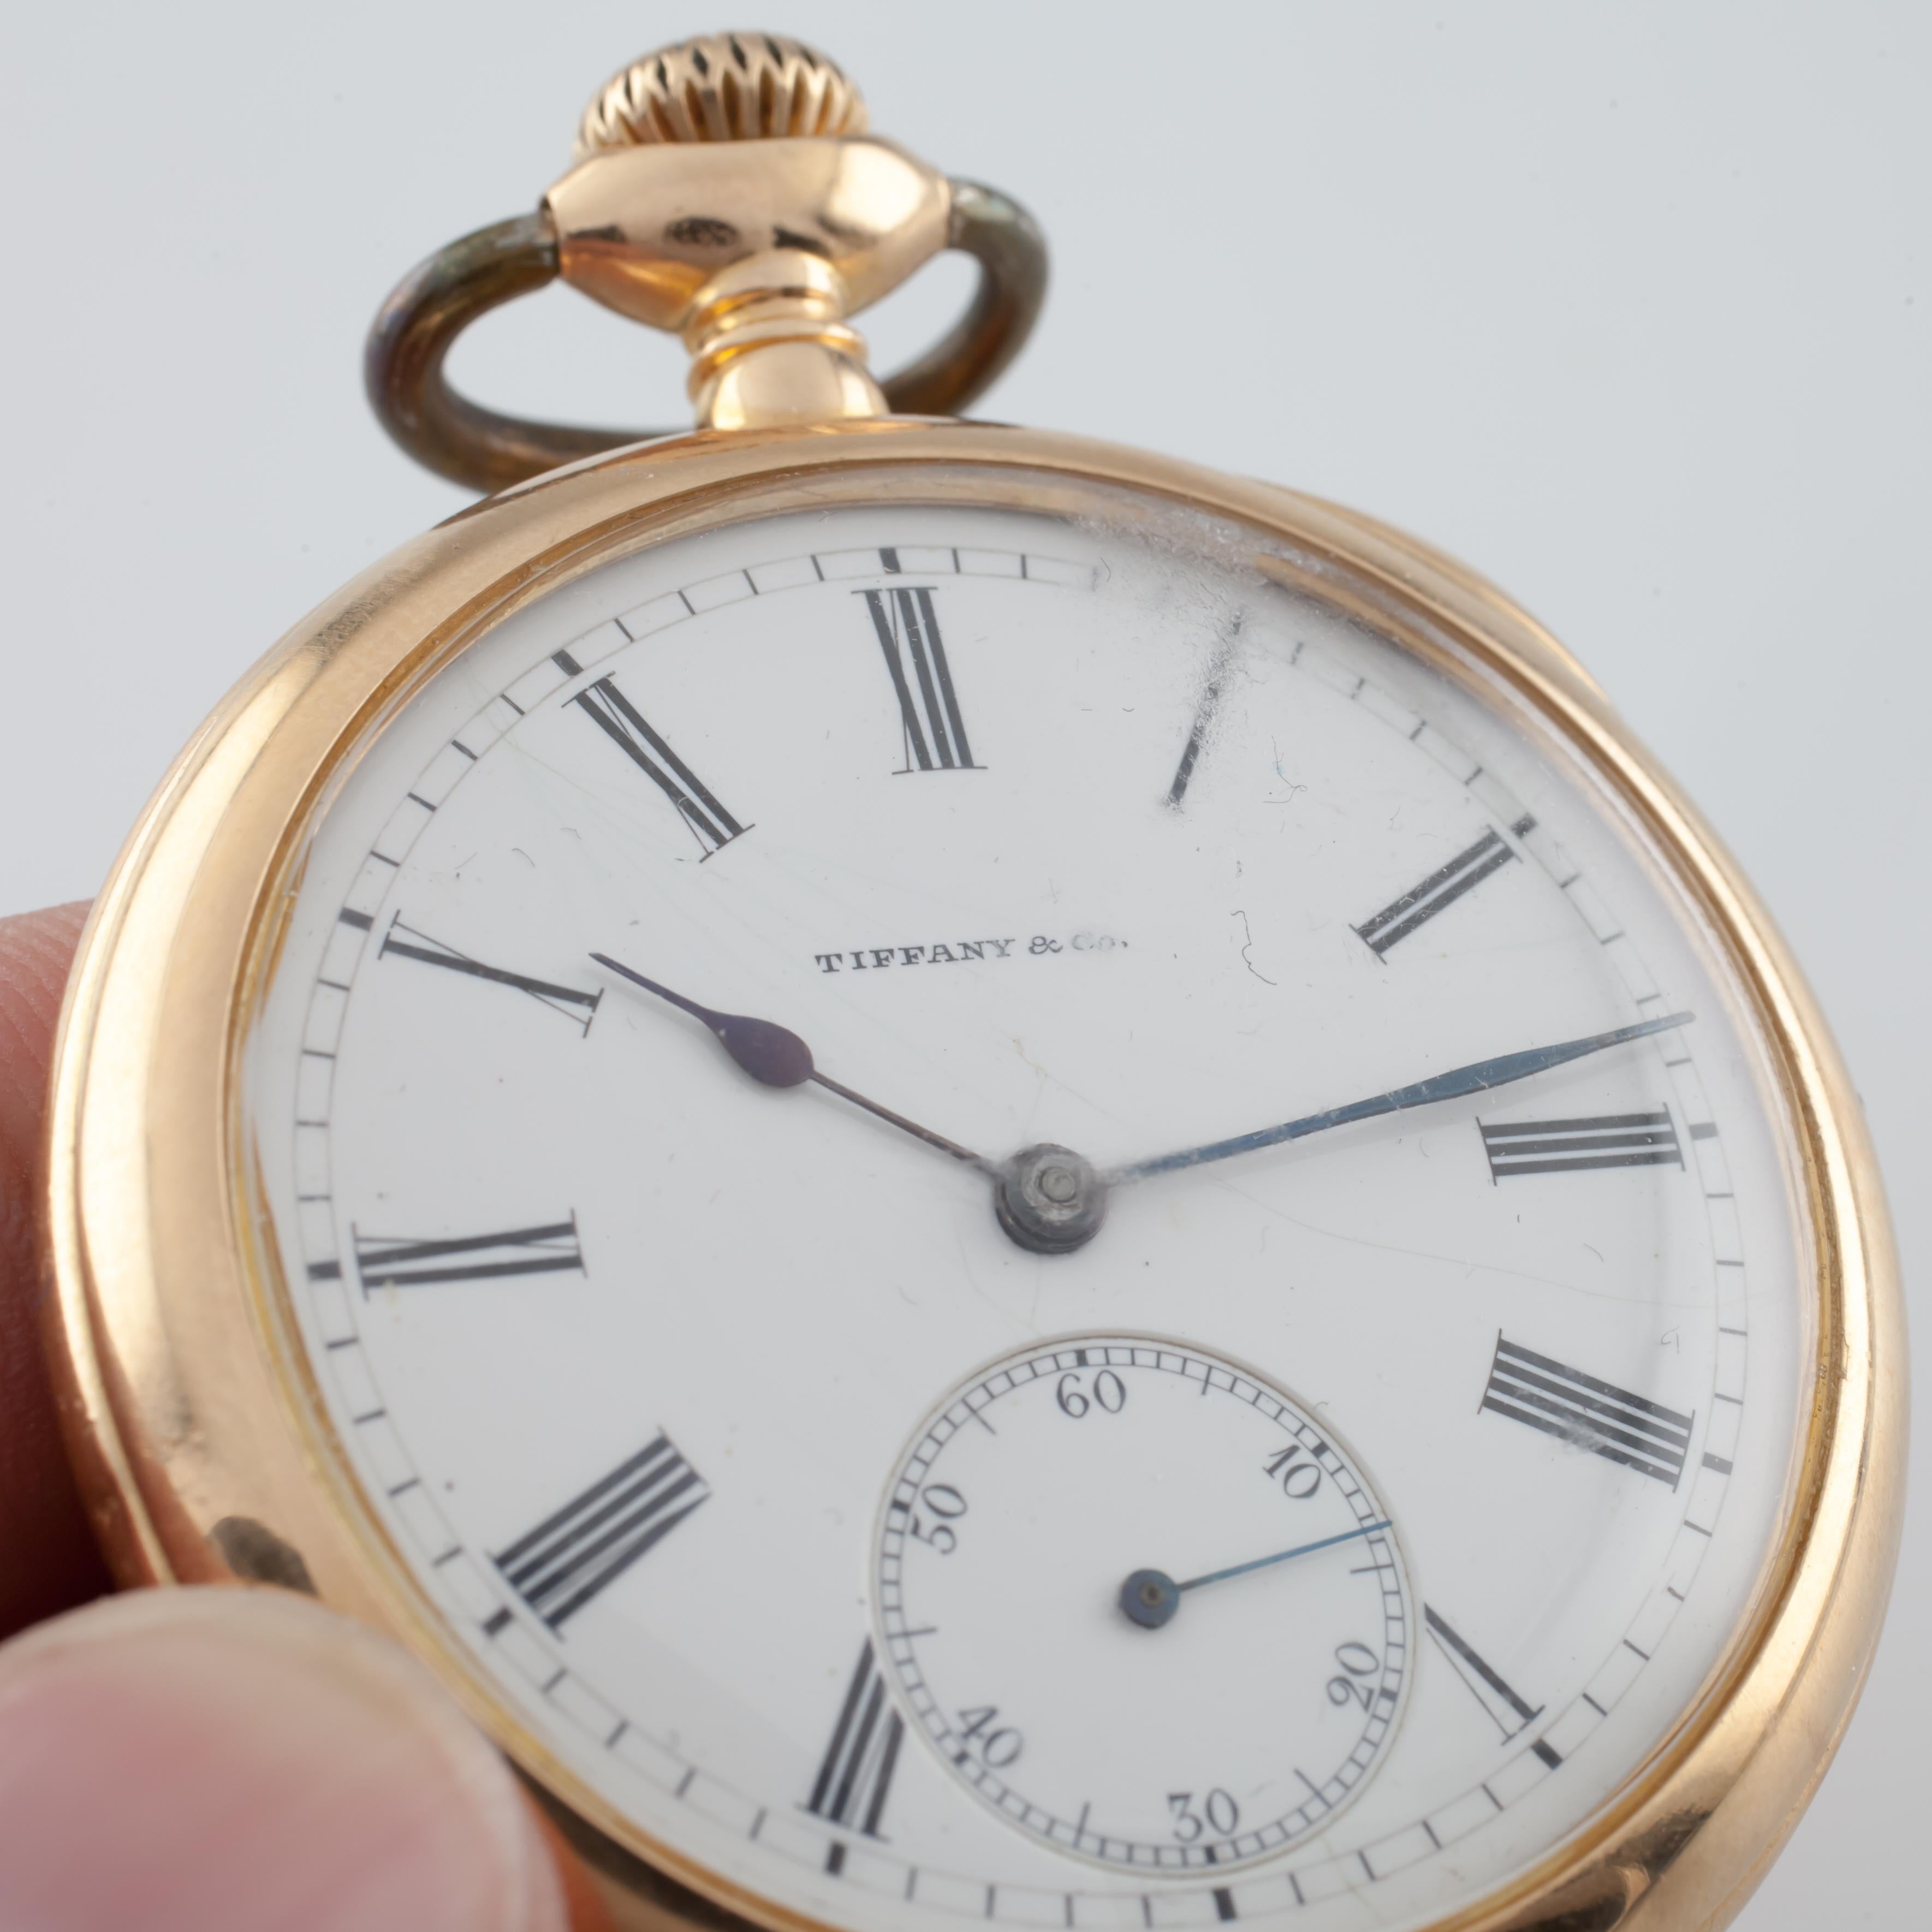 Beautiful Antique Tiffany & Co. Pocket Watch w/ White Dial Including Blue Hands & Dedicated Second Dial
18k Gold Case
Black Roman Numerals
Case Serial # 122508
Tiffany & Co. Movement Serial # 122508
Total Mass = 72.6 grams
Size 8
A couple of minor